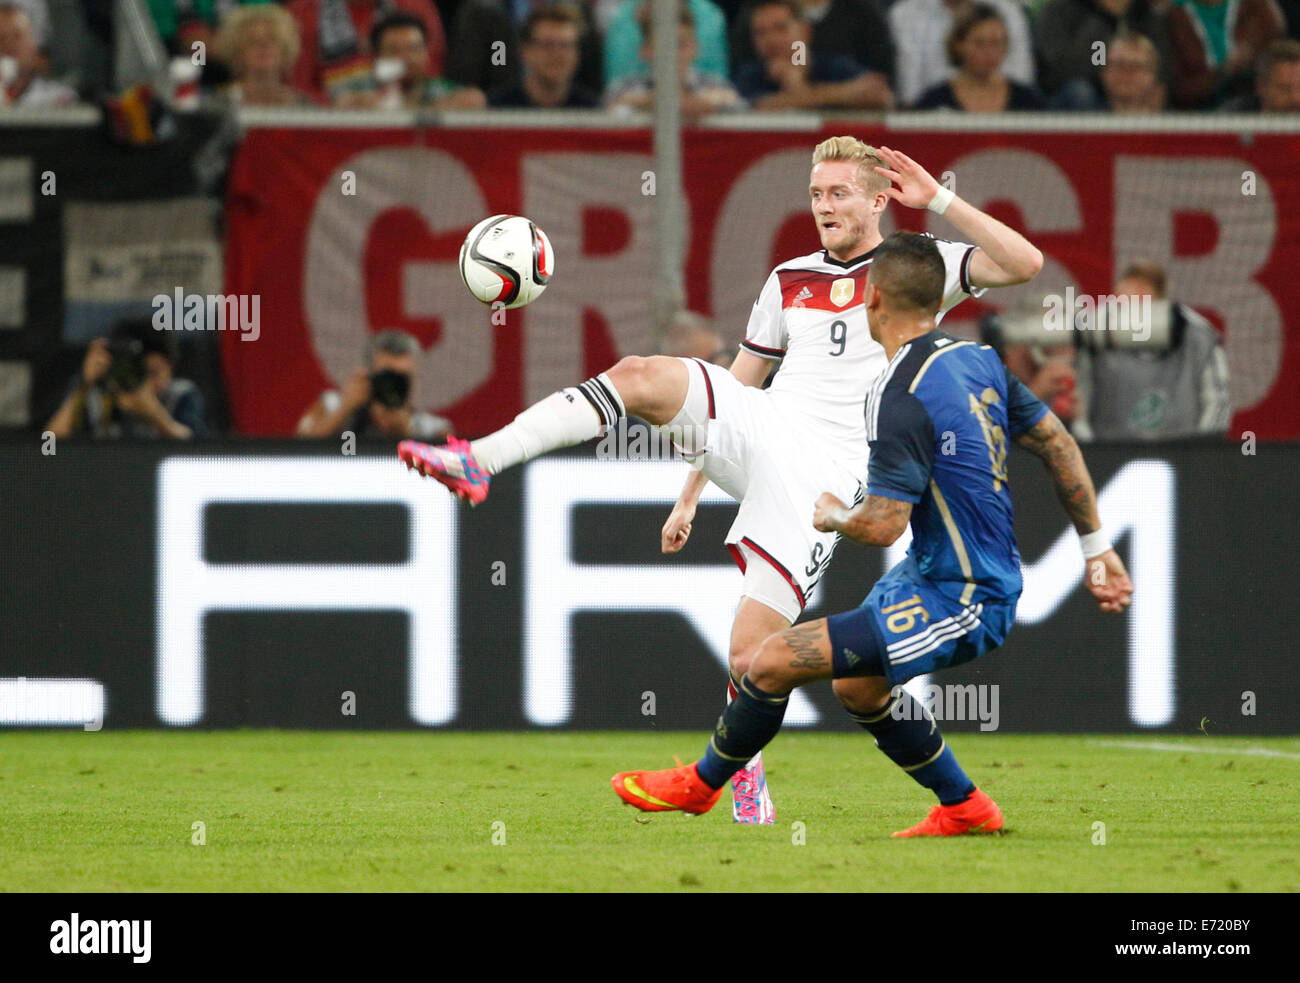 Duesseldorf, Germany. 03rd Sep, 2014. Germany's Andre Schuerrle (L) Argentina's Marcos Rojo vie for the ball during international soccer match between Germany and Argentina at Esprit arena in Duesseldorf, Germany, 03 September 2014. Photo: Roland Weihrauch/dpa/Alamy Live News Stock Photo